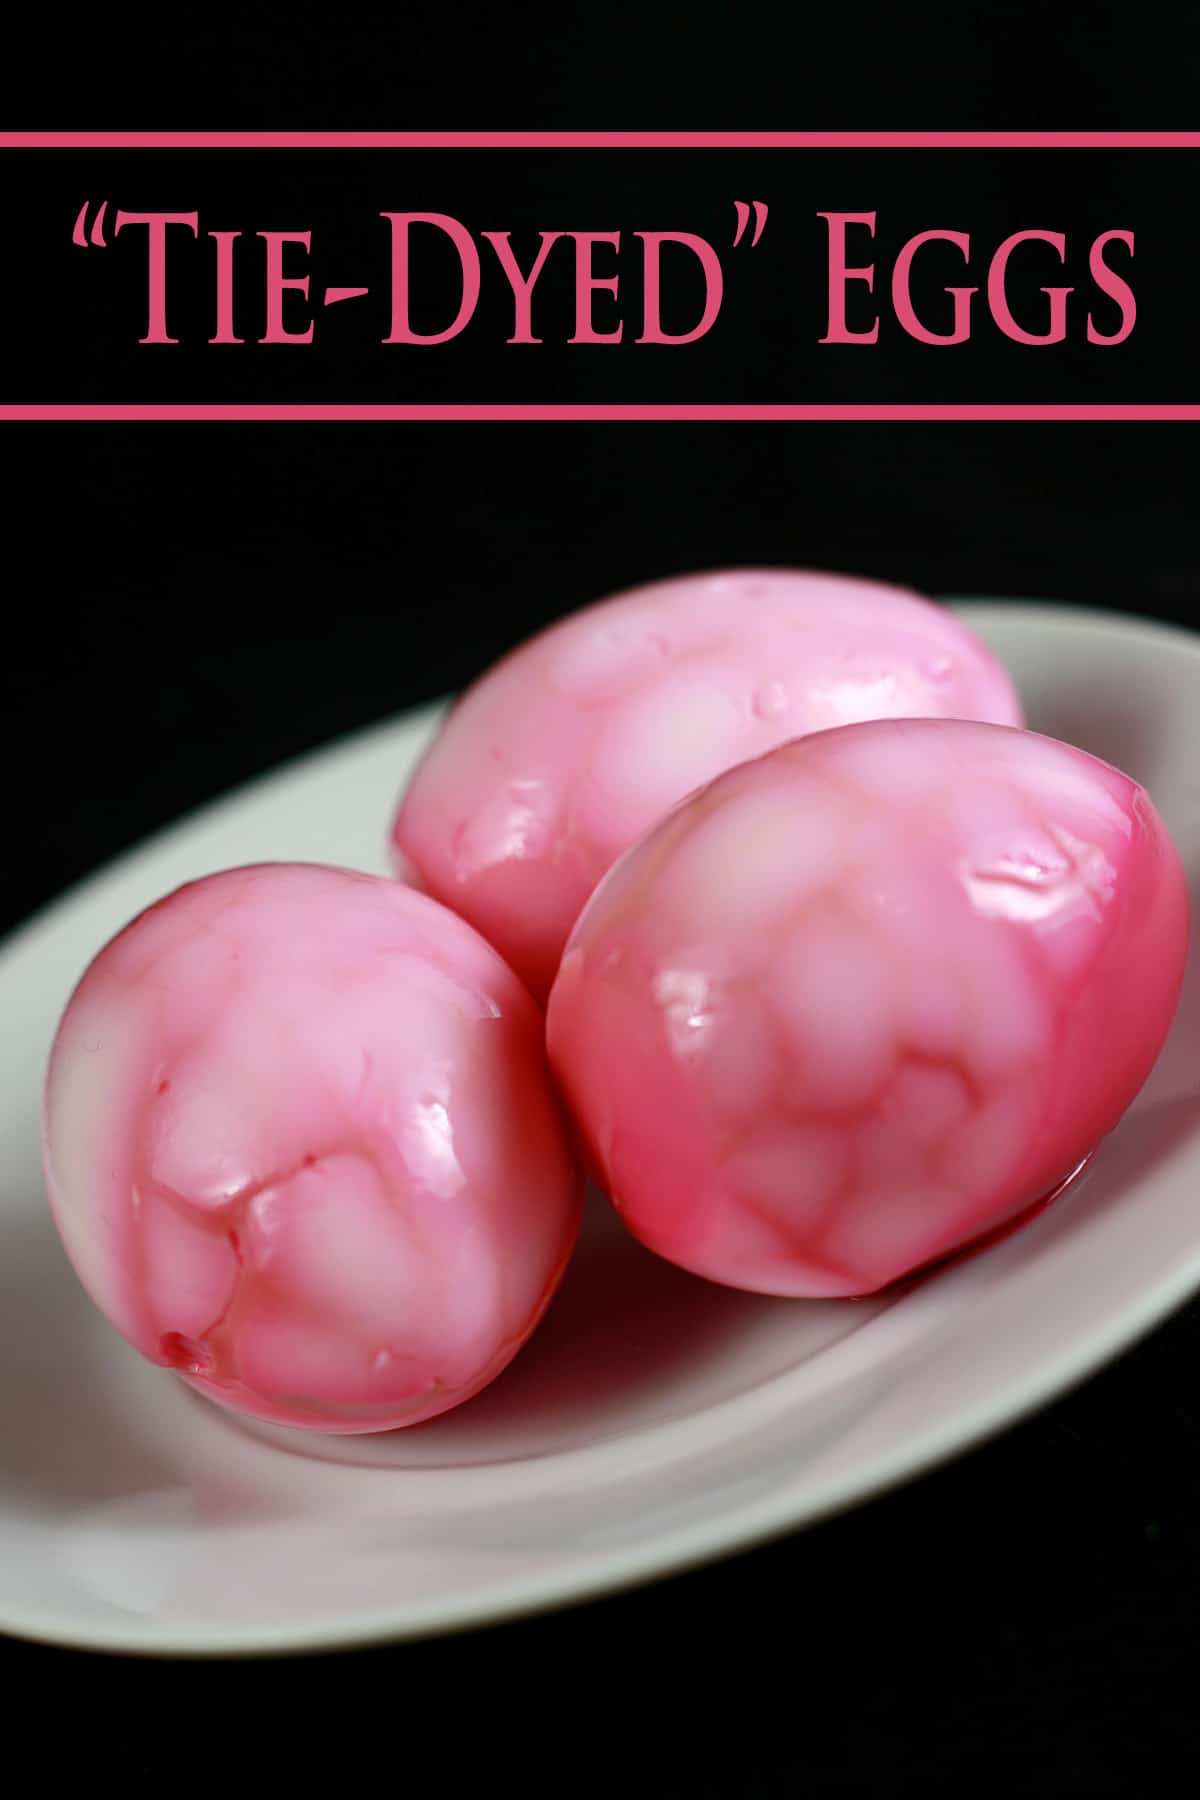 3 bright pink hard boiled eggs on a plate. They have a fractured "tie dye" design.